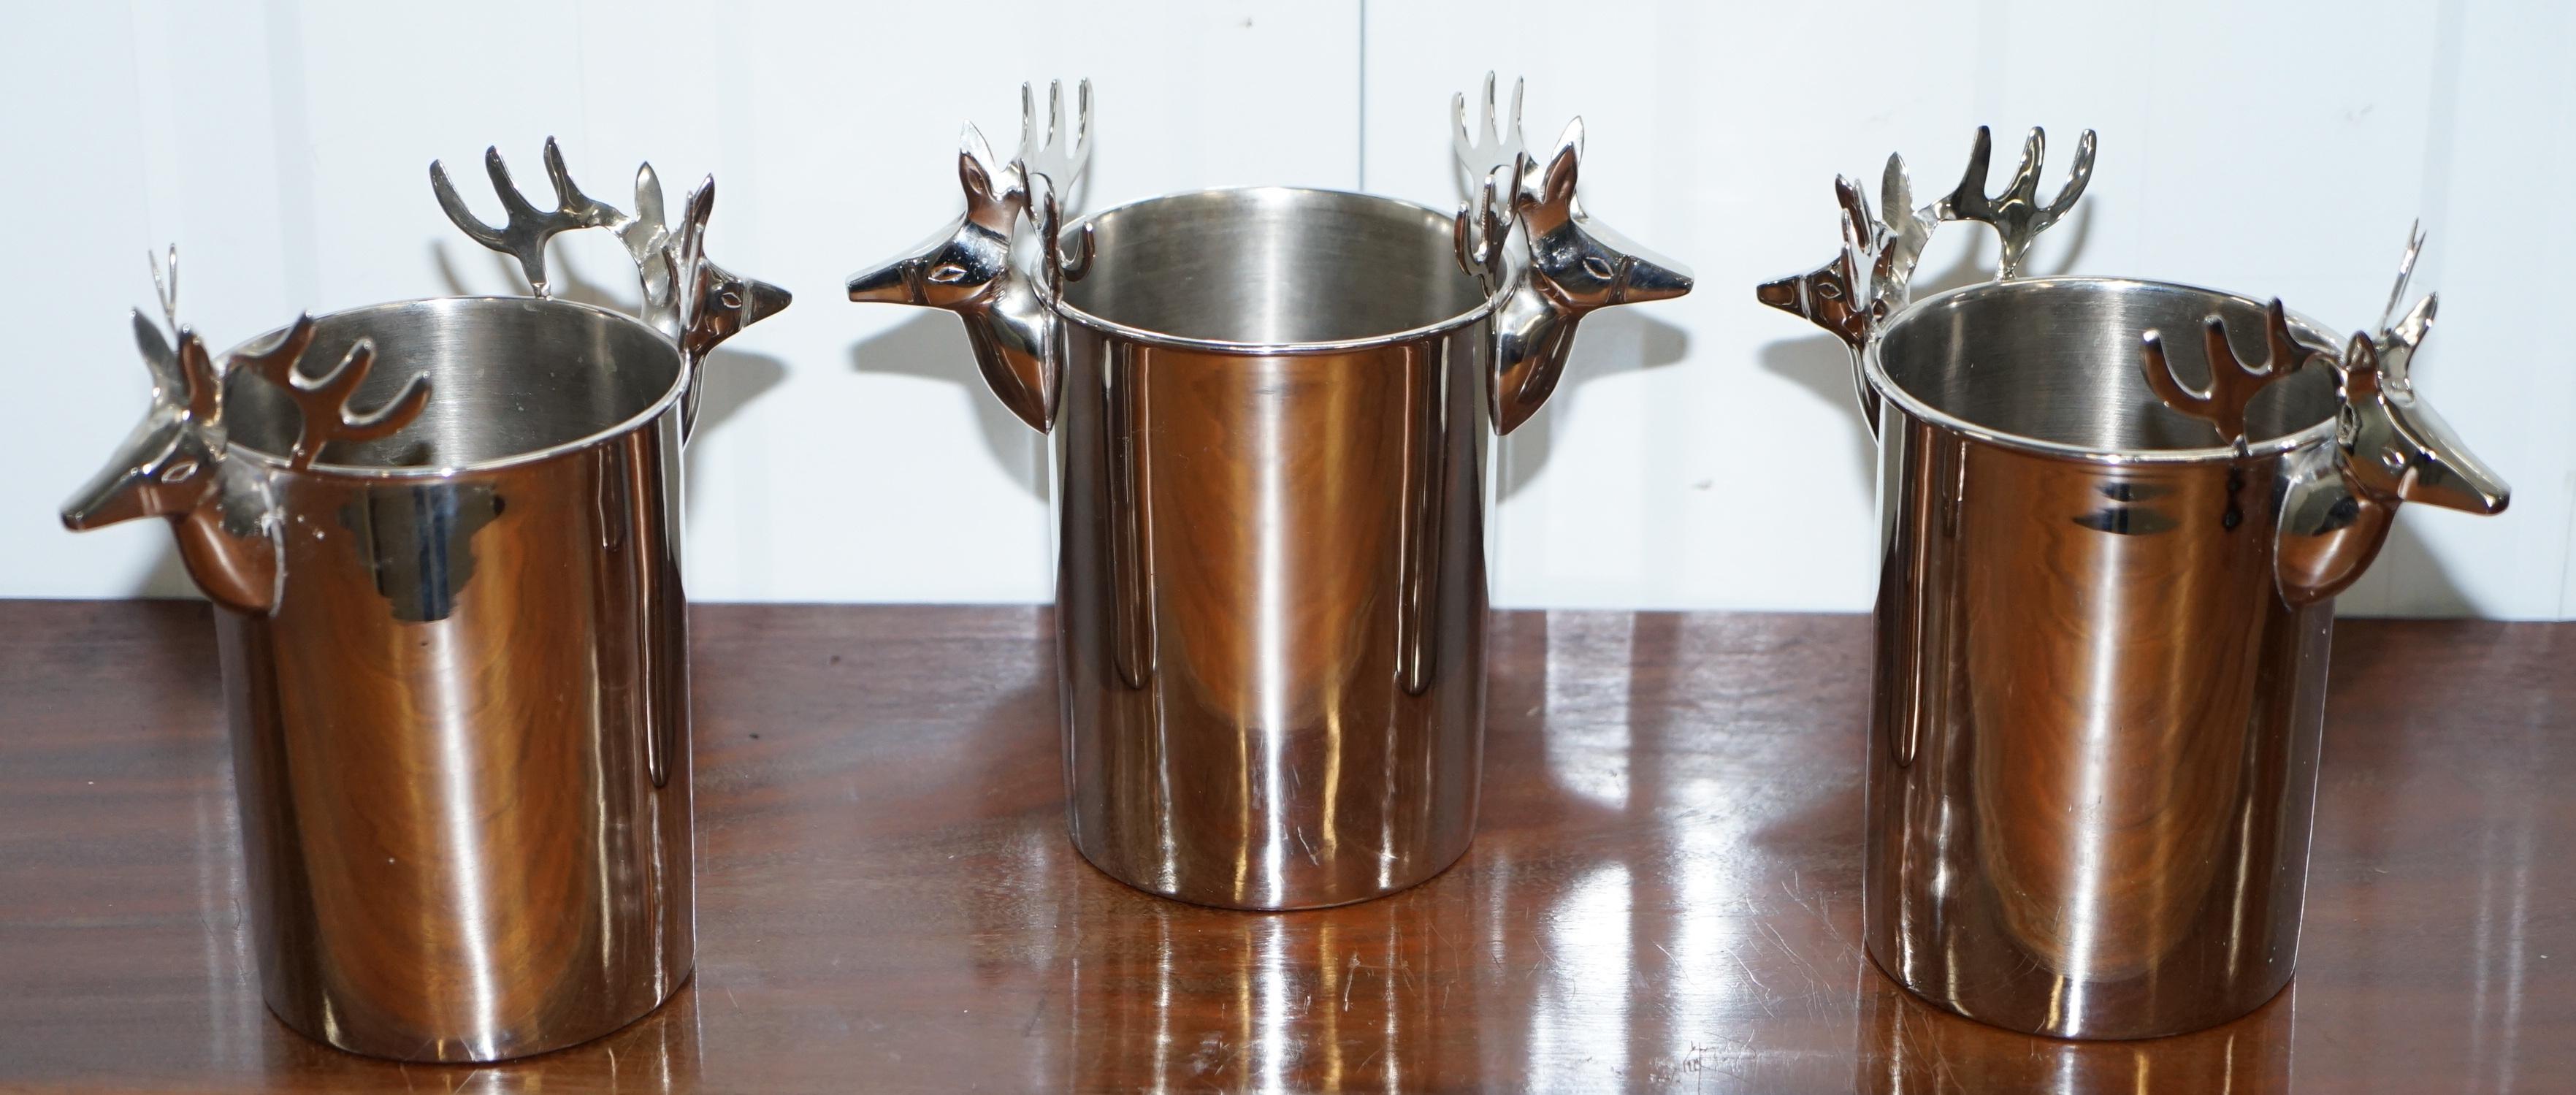 We are delighted to offer for sale this very nicely cast silver plated set of three wine Champaign buckets 

A good looking and decorative set that add a sense of occasion to the serving of your favourite plonk

As you can see I also have a